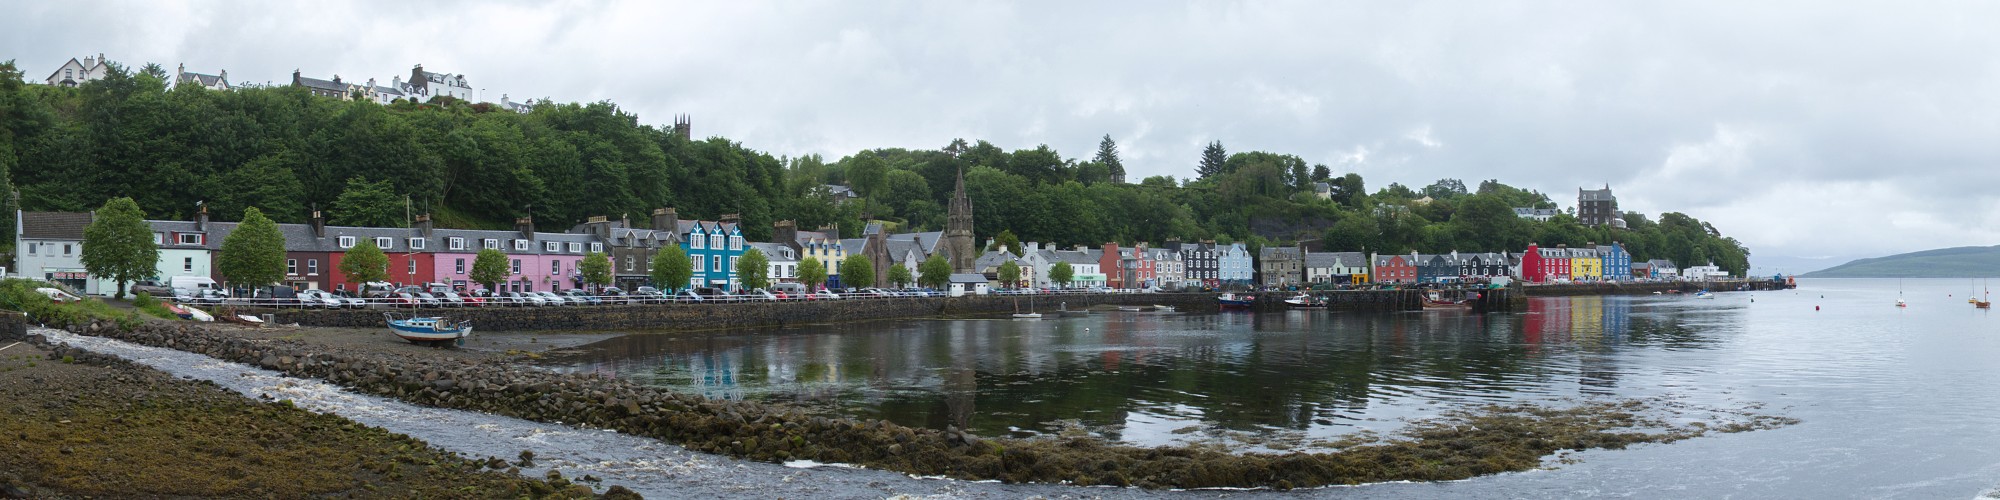 Tobermory at low tide